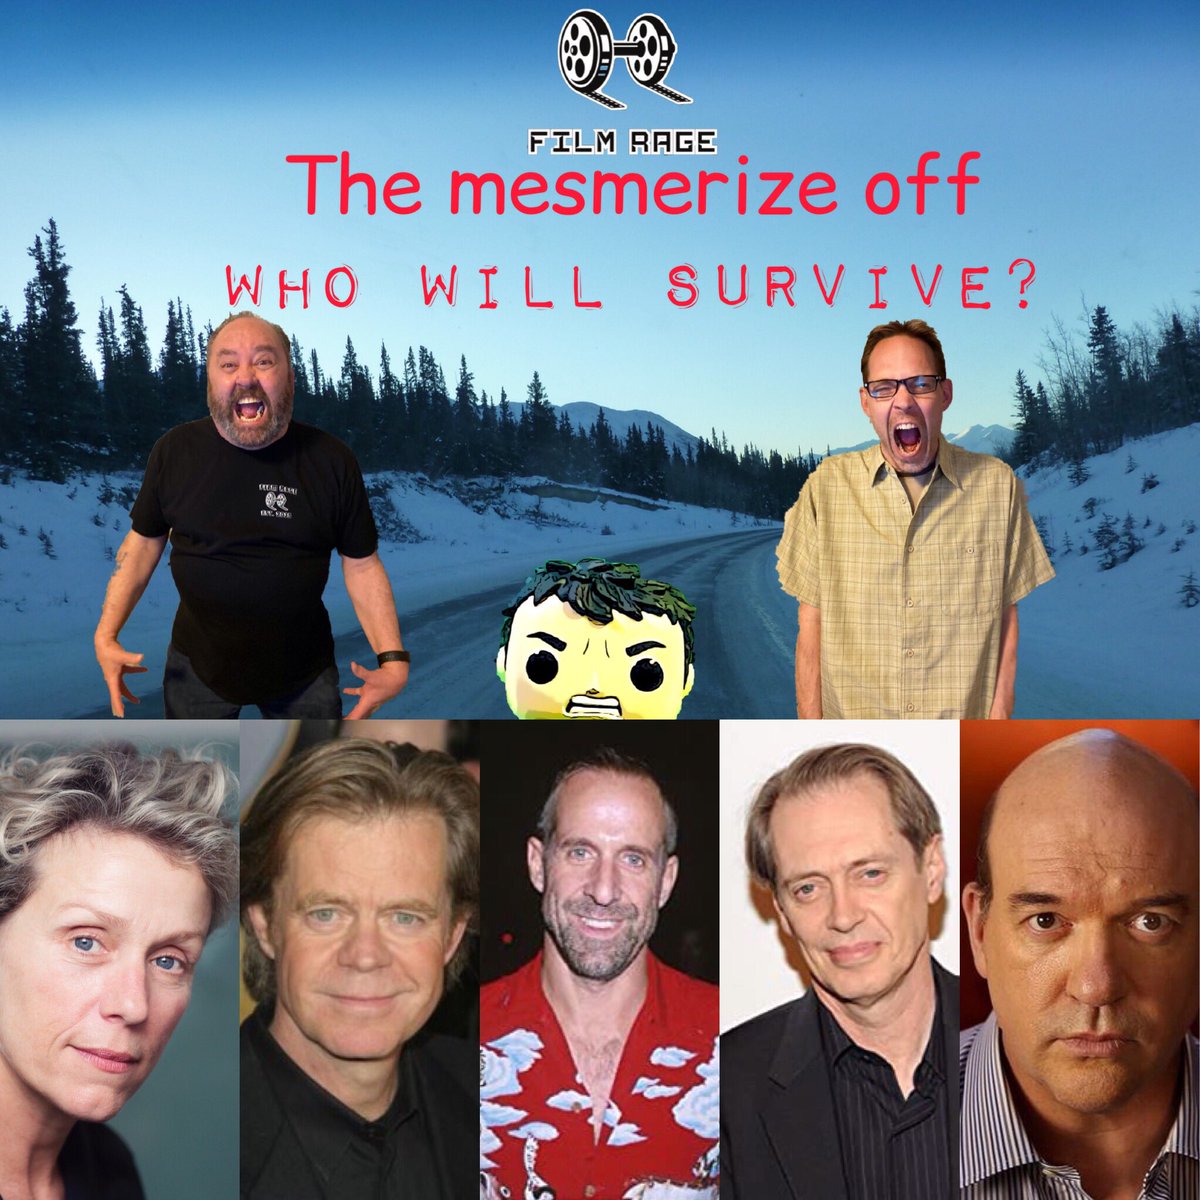 It’s coming...this week we have a mesmerized throw down.  5 actors on our mesmerizing list.  Listen in Wednesday to see who survived......
Tell us who you would pick to win? 
Francis McDormand
Peter Stormare
Steve Buscemi
William H Macy
John Carroll Lynch
Tagged our #filmfam